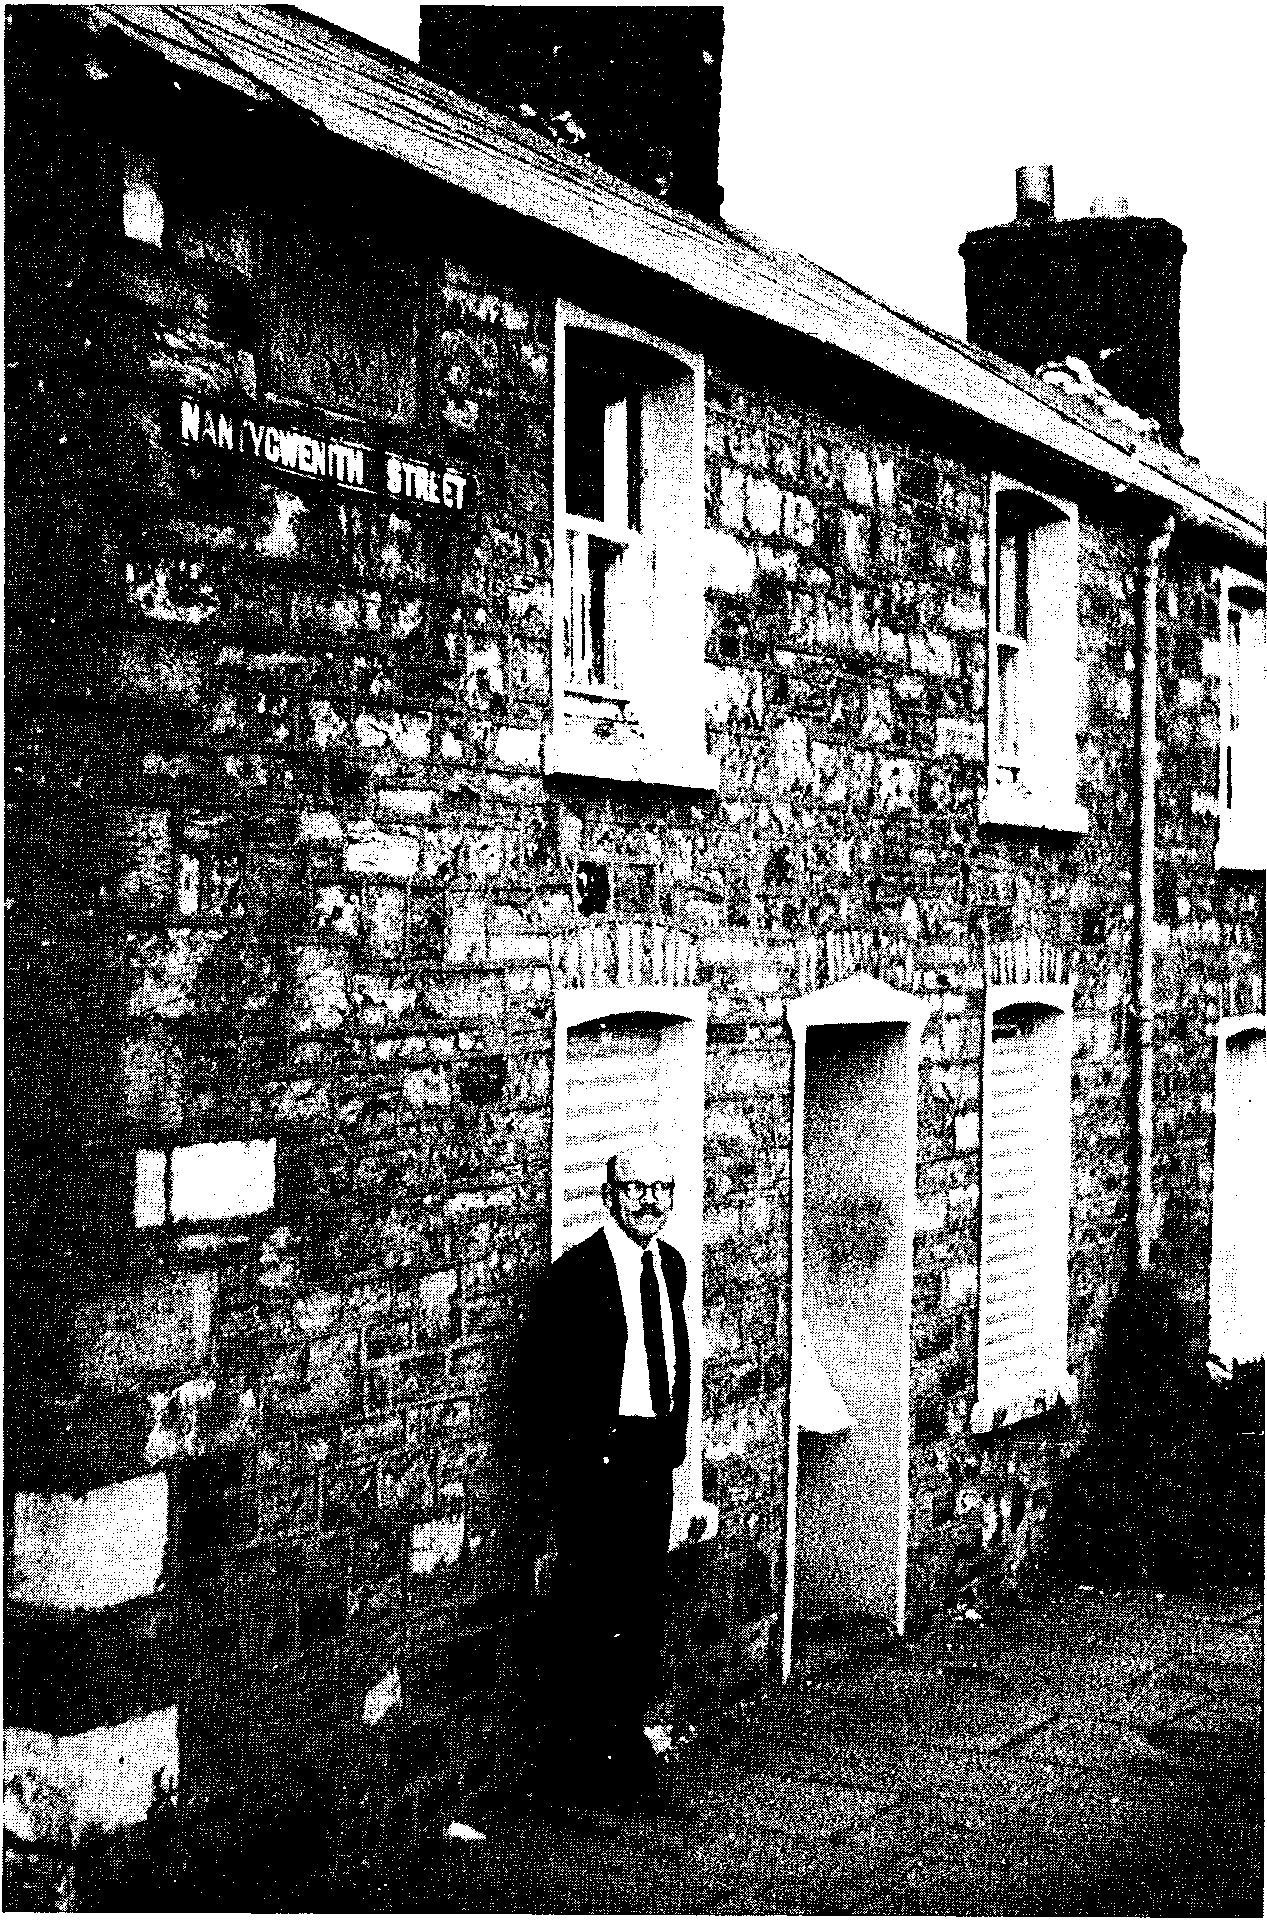 MAN STANDING IN FRONT OF A HOUSE